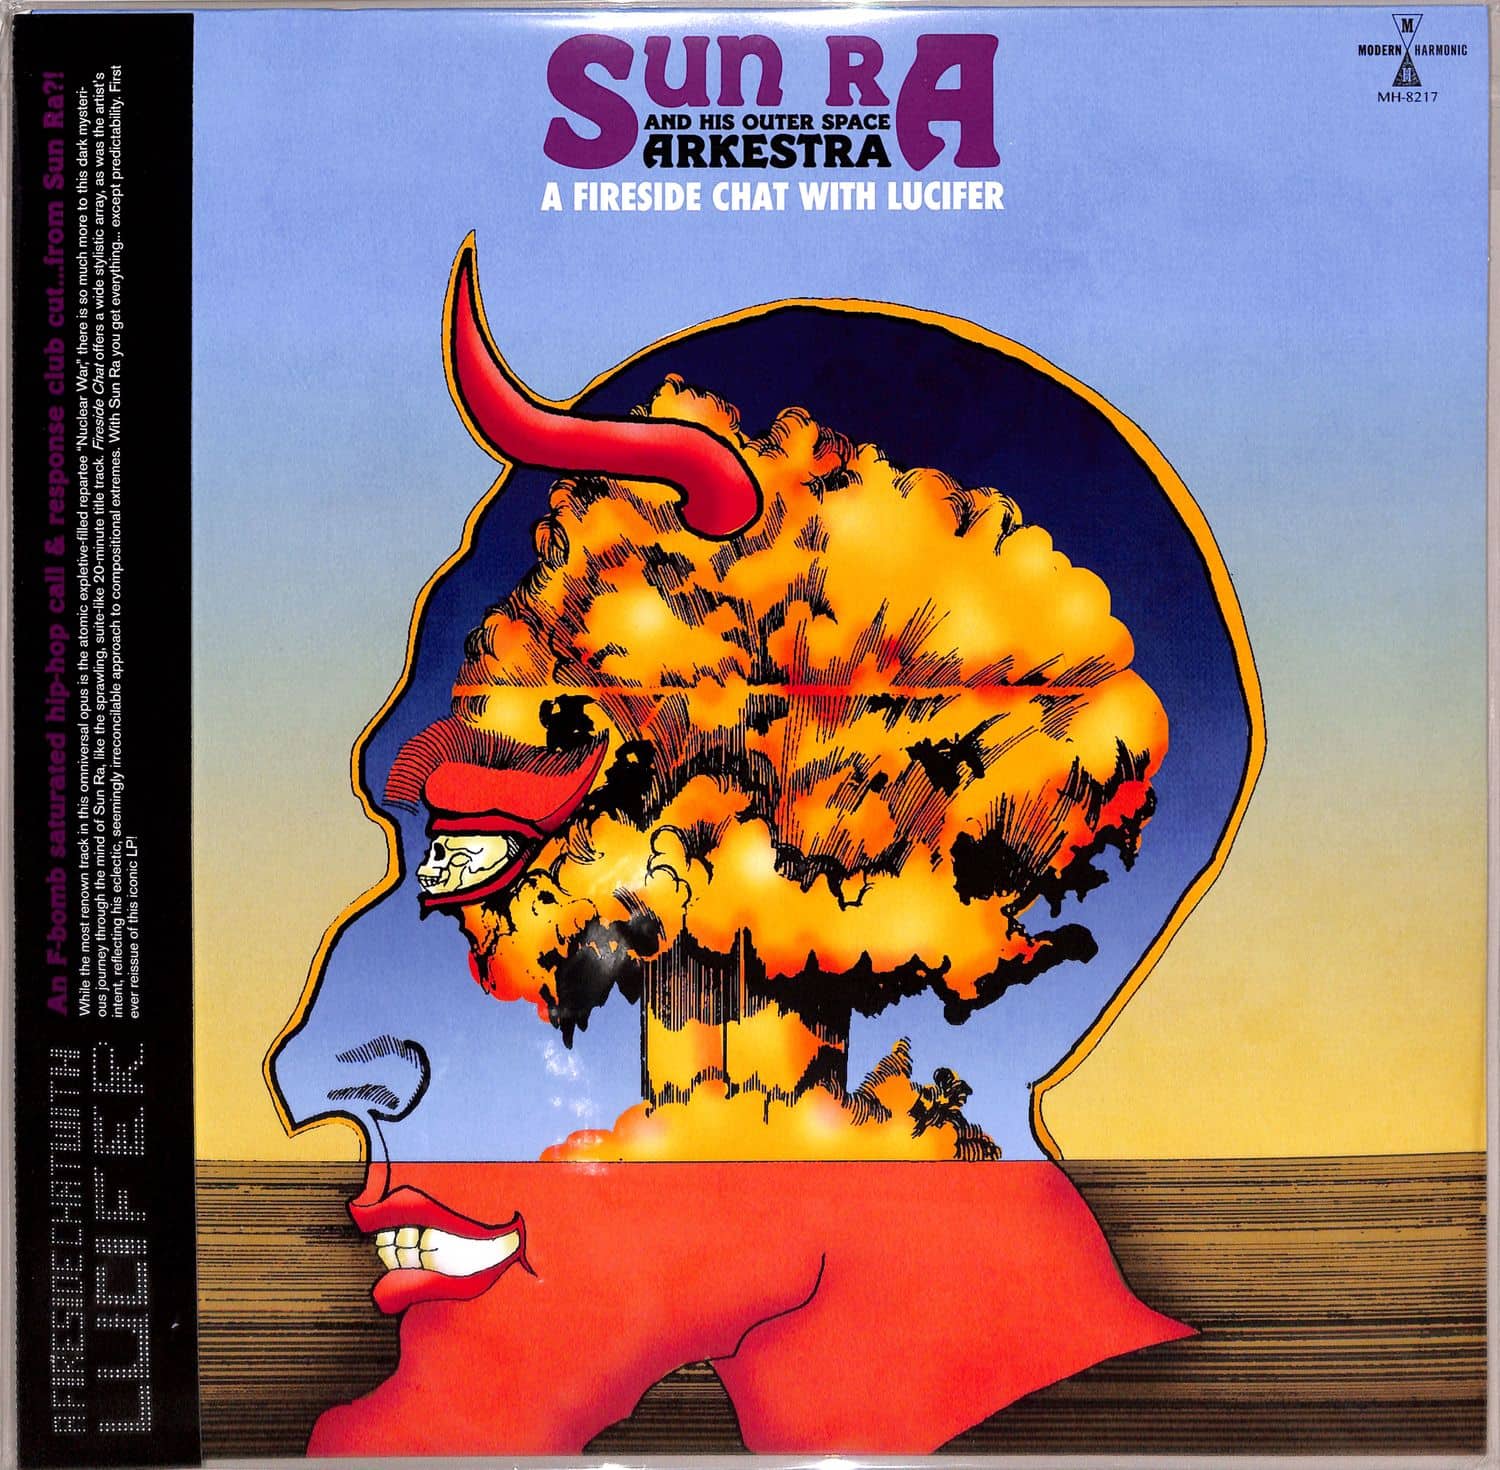 Sun Ra - A FIRESIDE CHAT WITH LUCIFER 